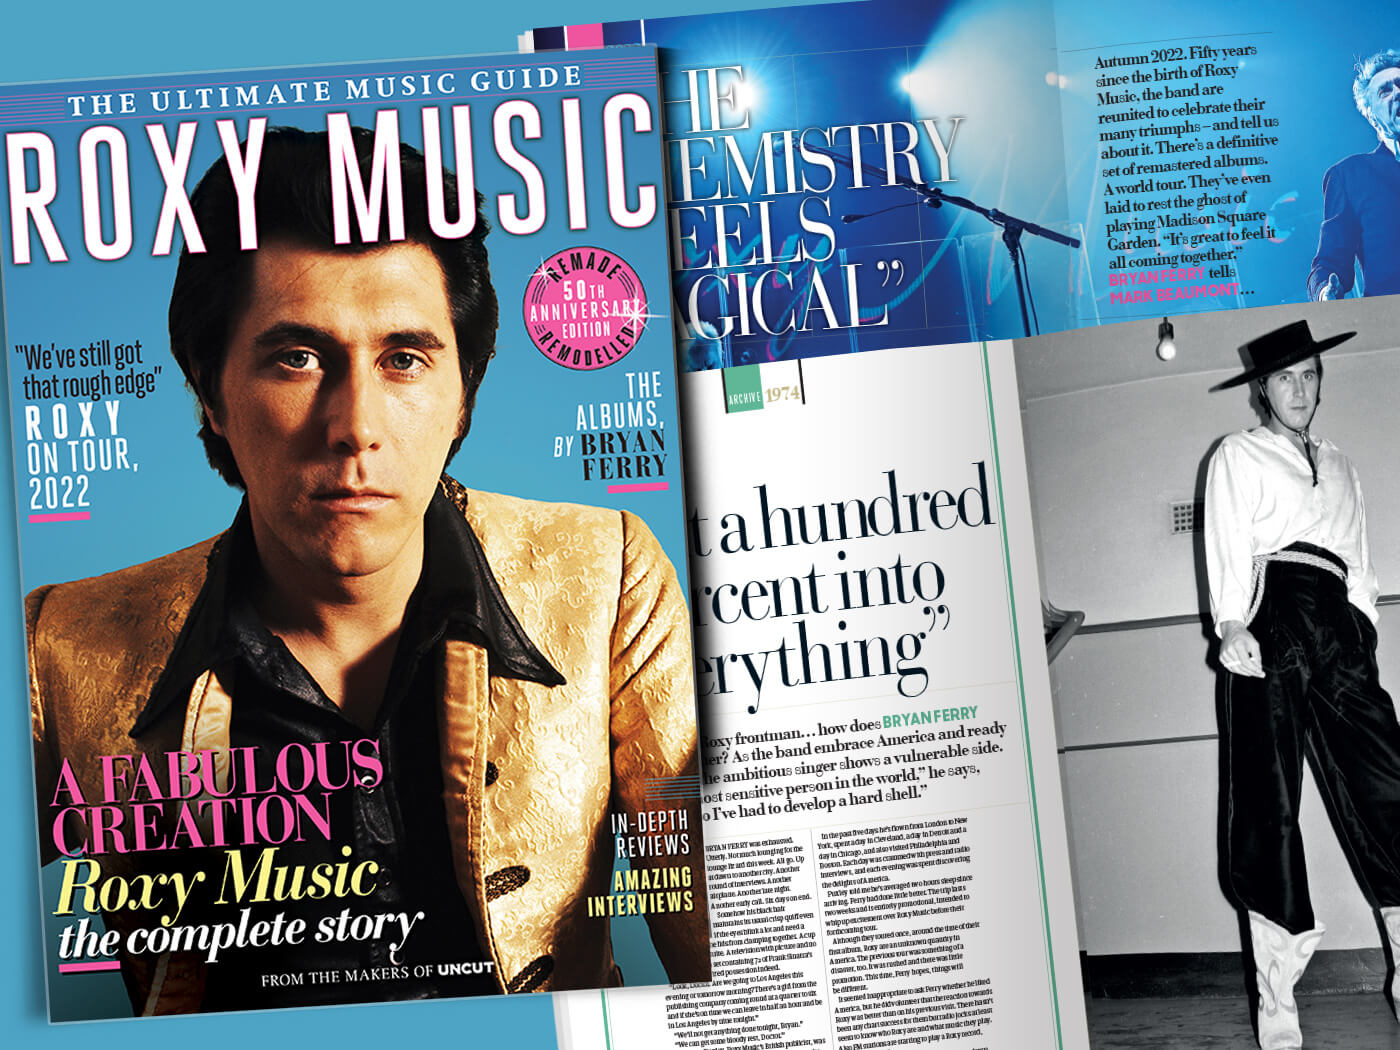 Introducing the Deluxe Ultimate Music Guide to Roxy Music